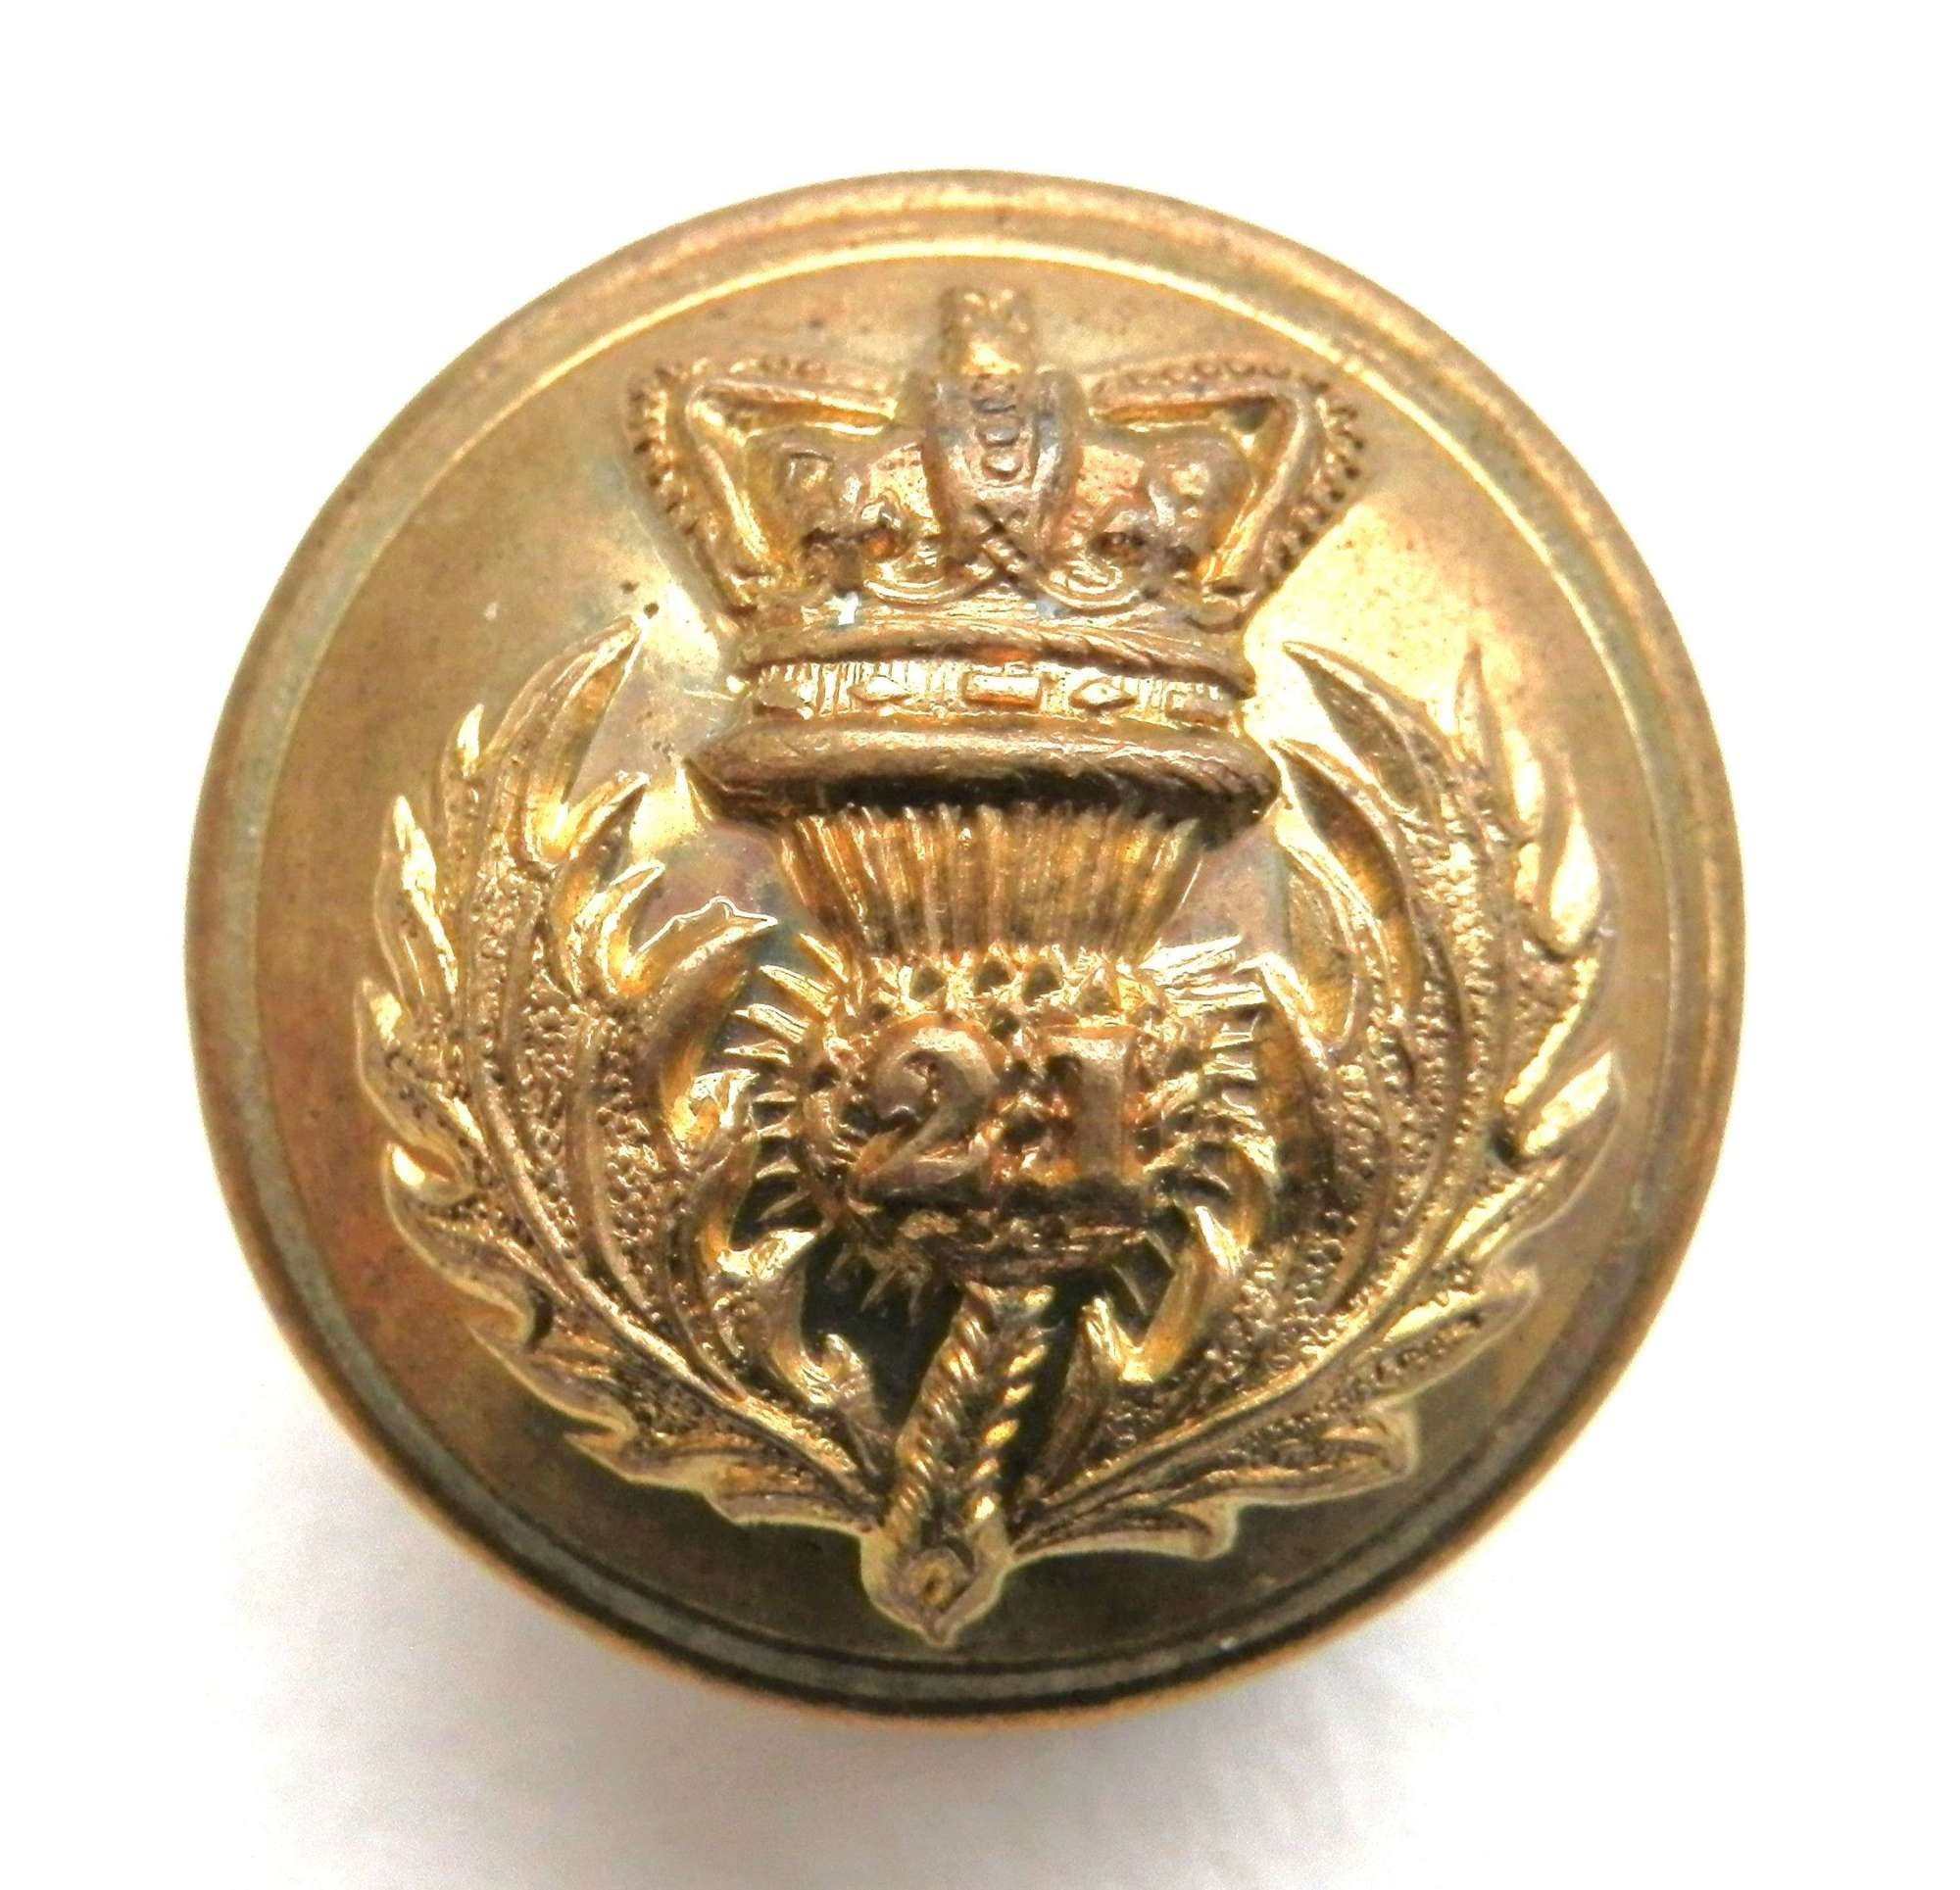 21st, Royal Scots Fusiliers Officers Button.